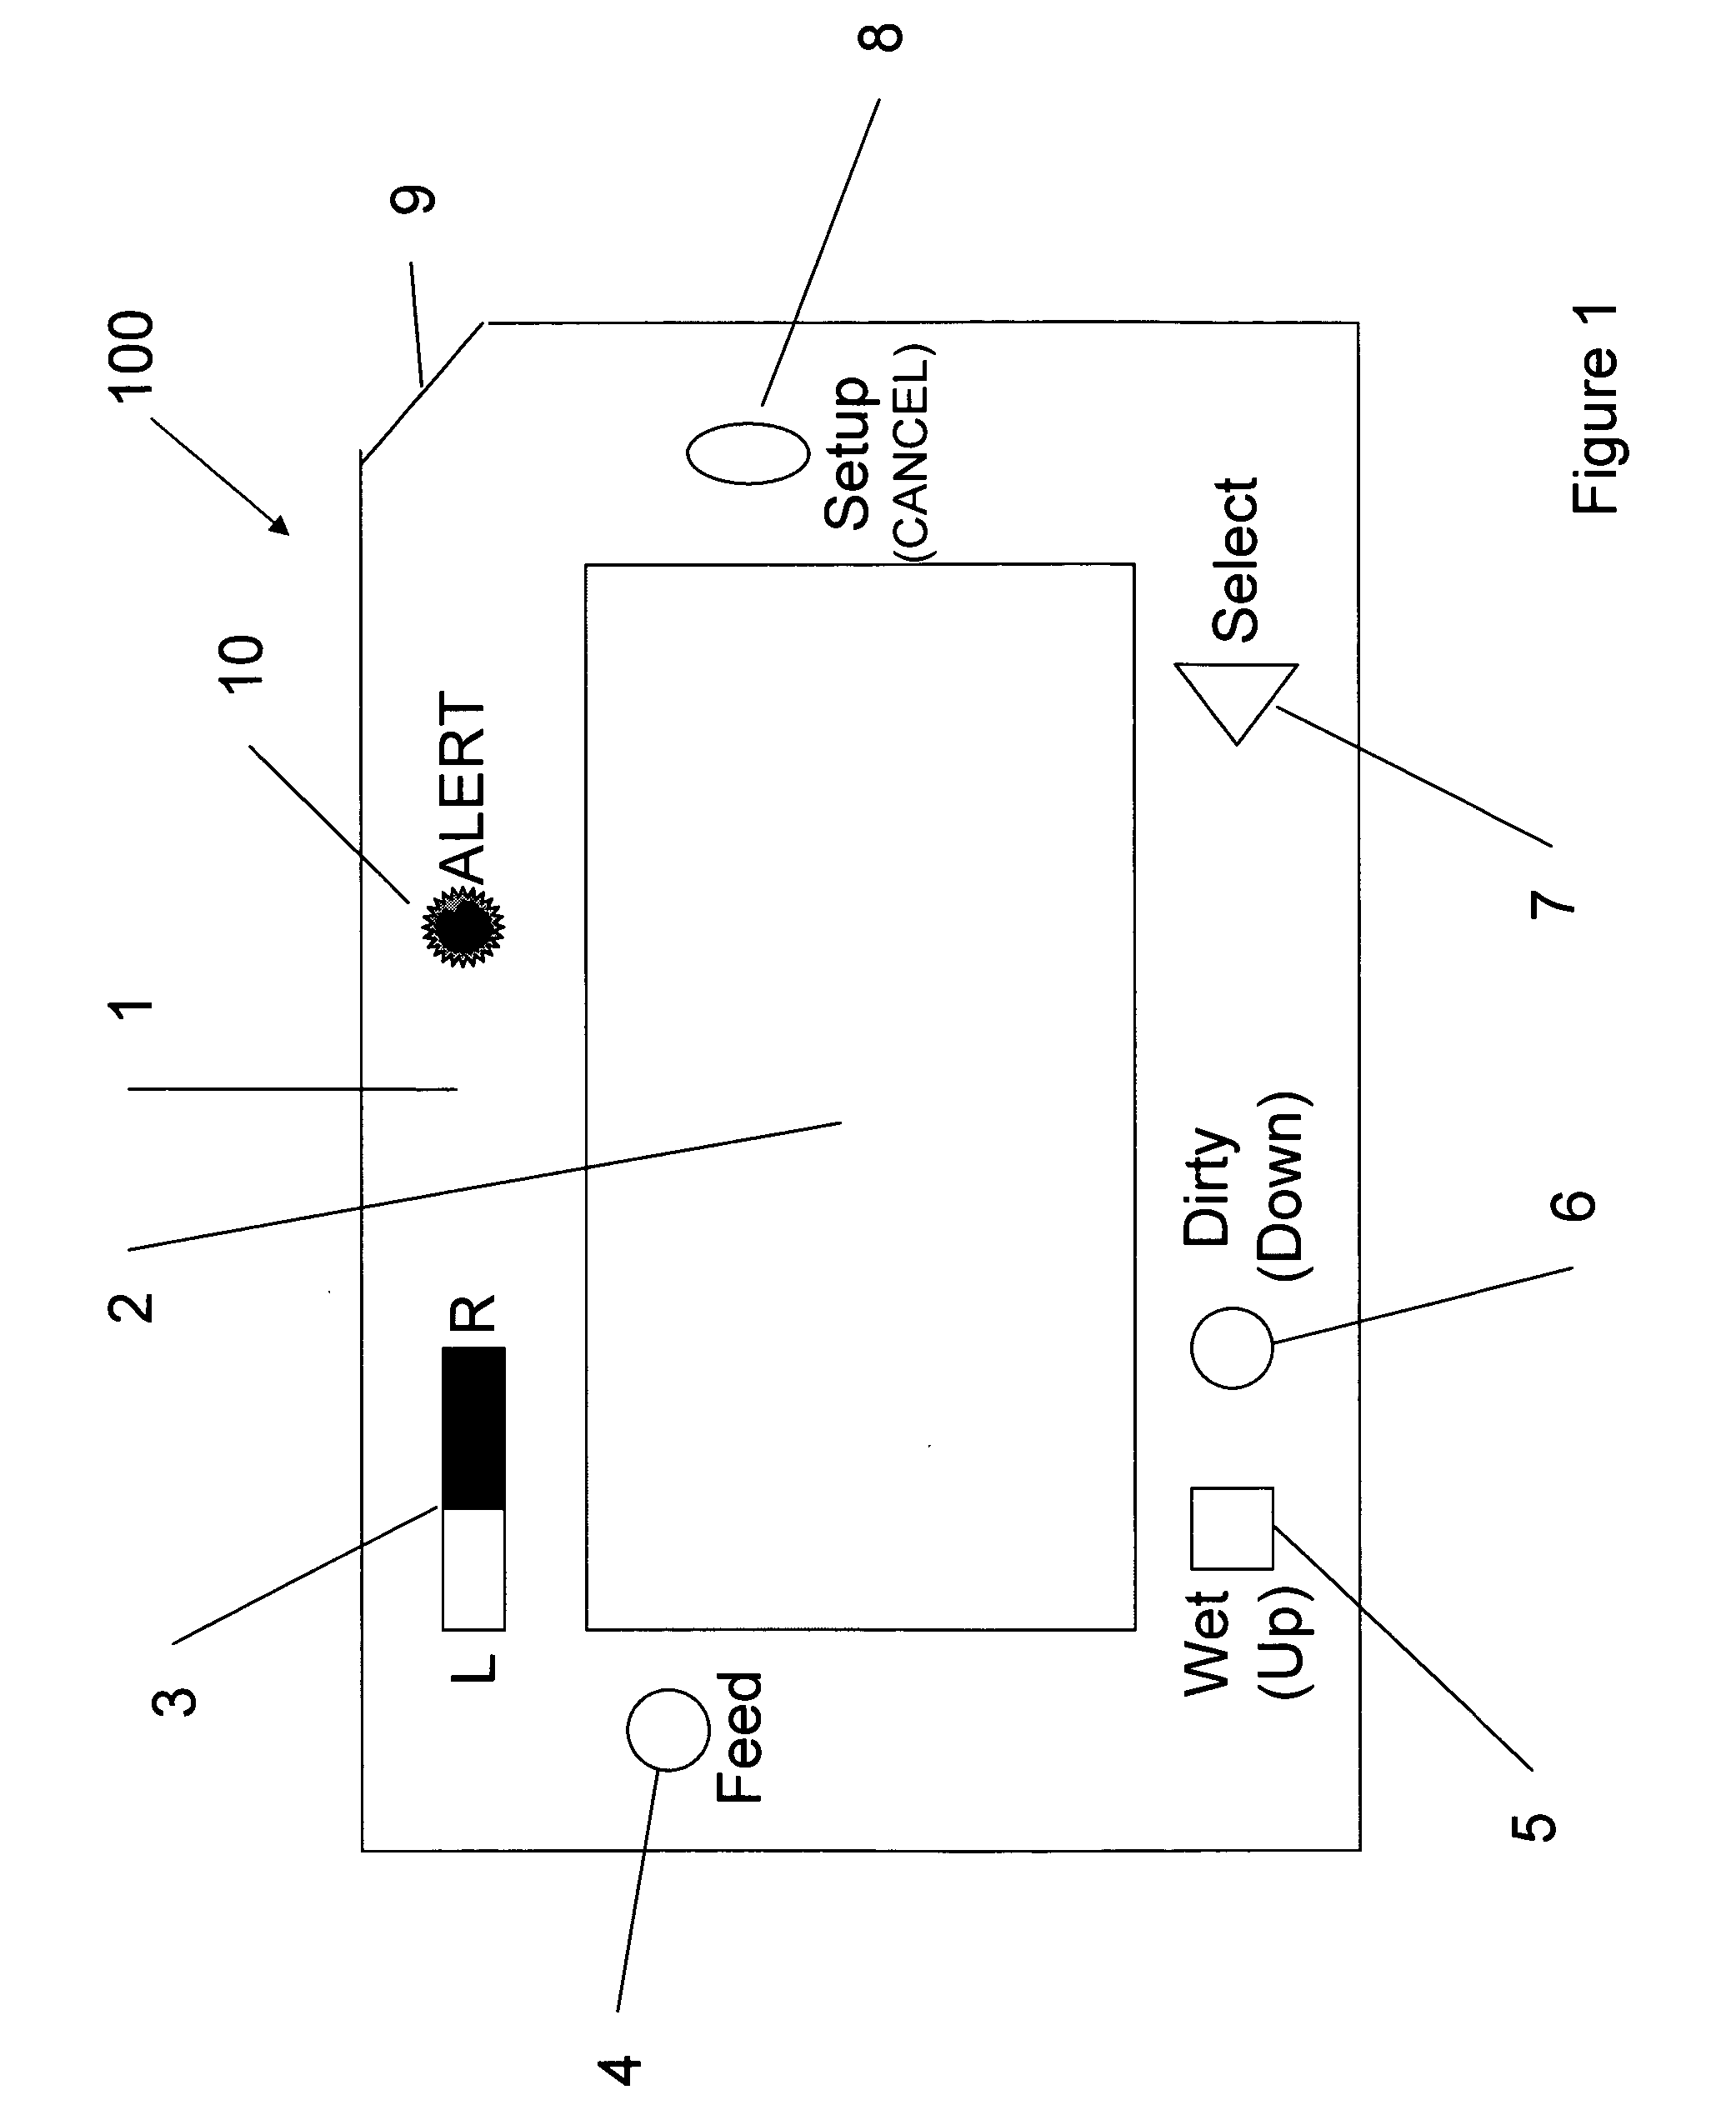 Breast feeding monitoring device and method